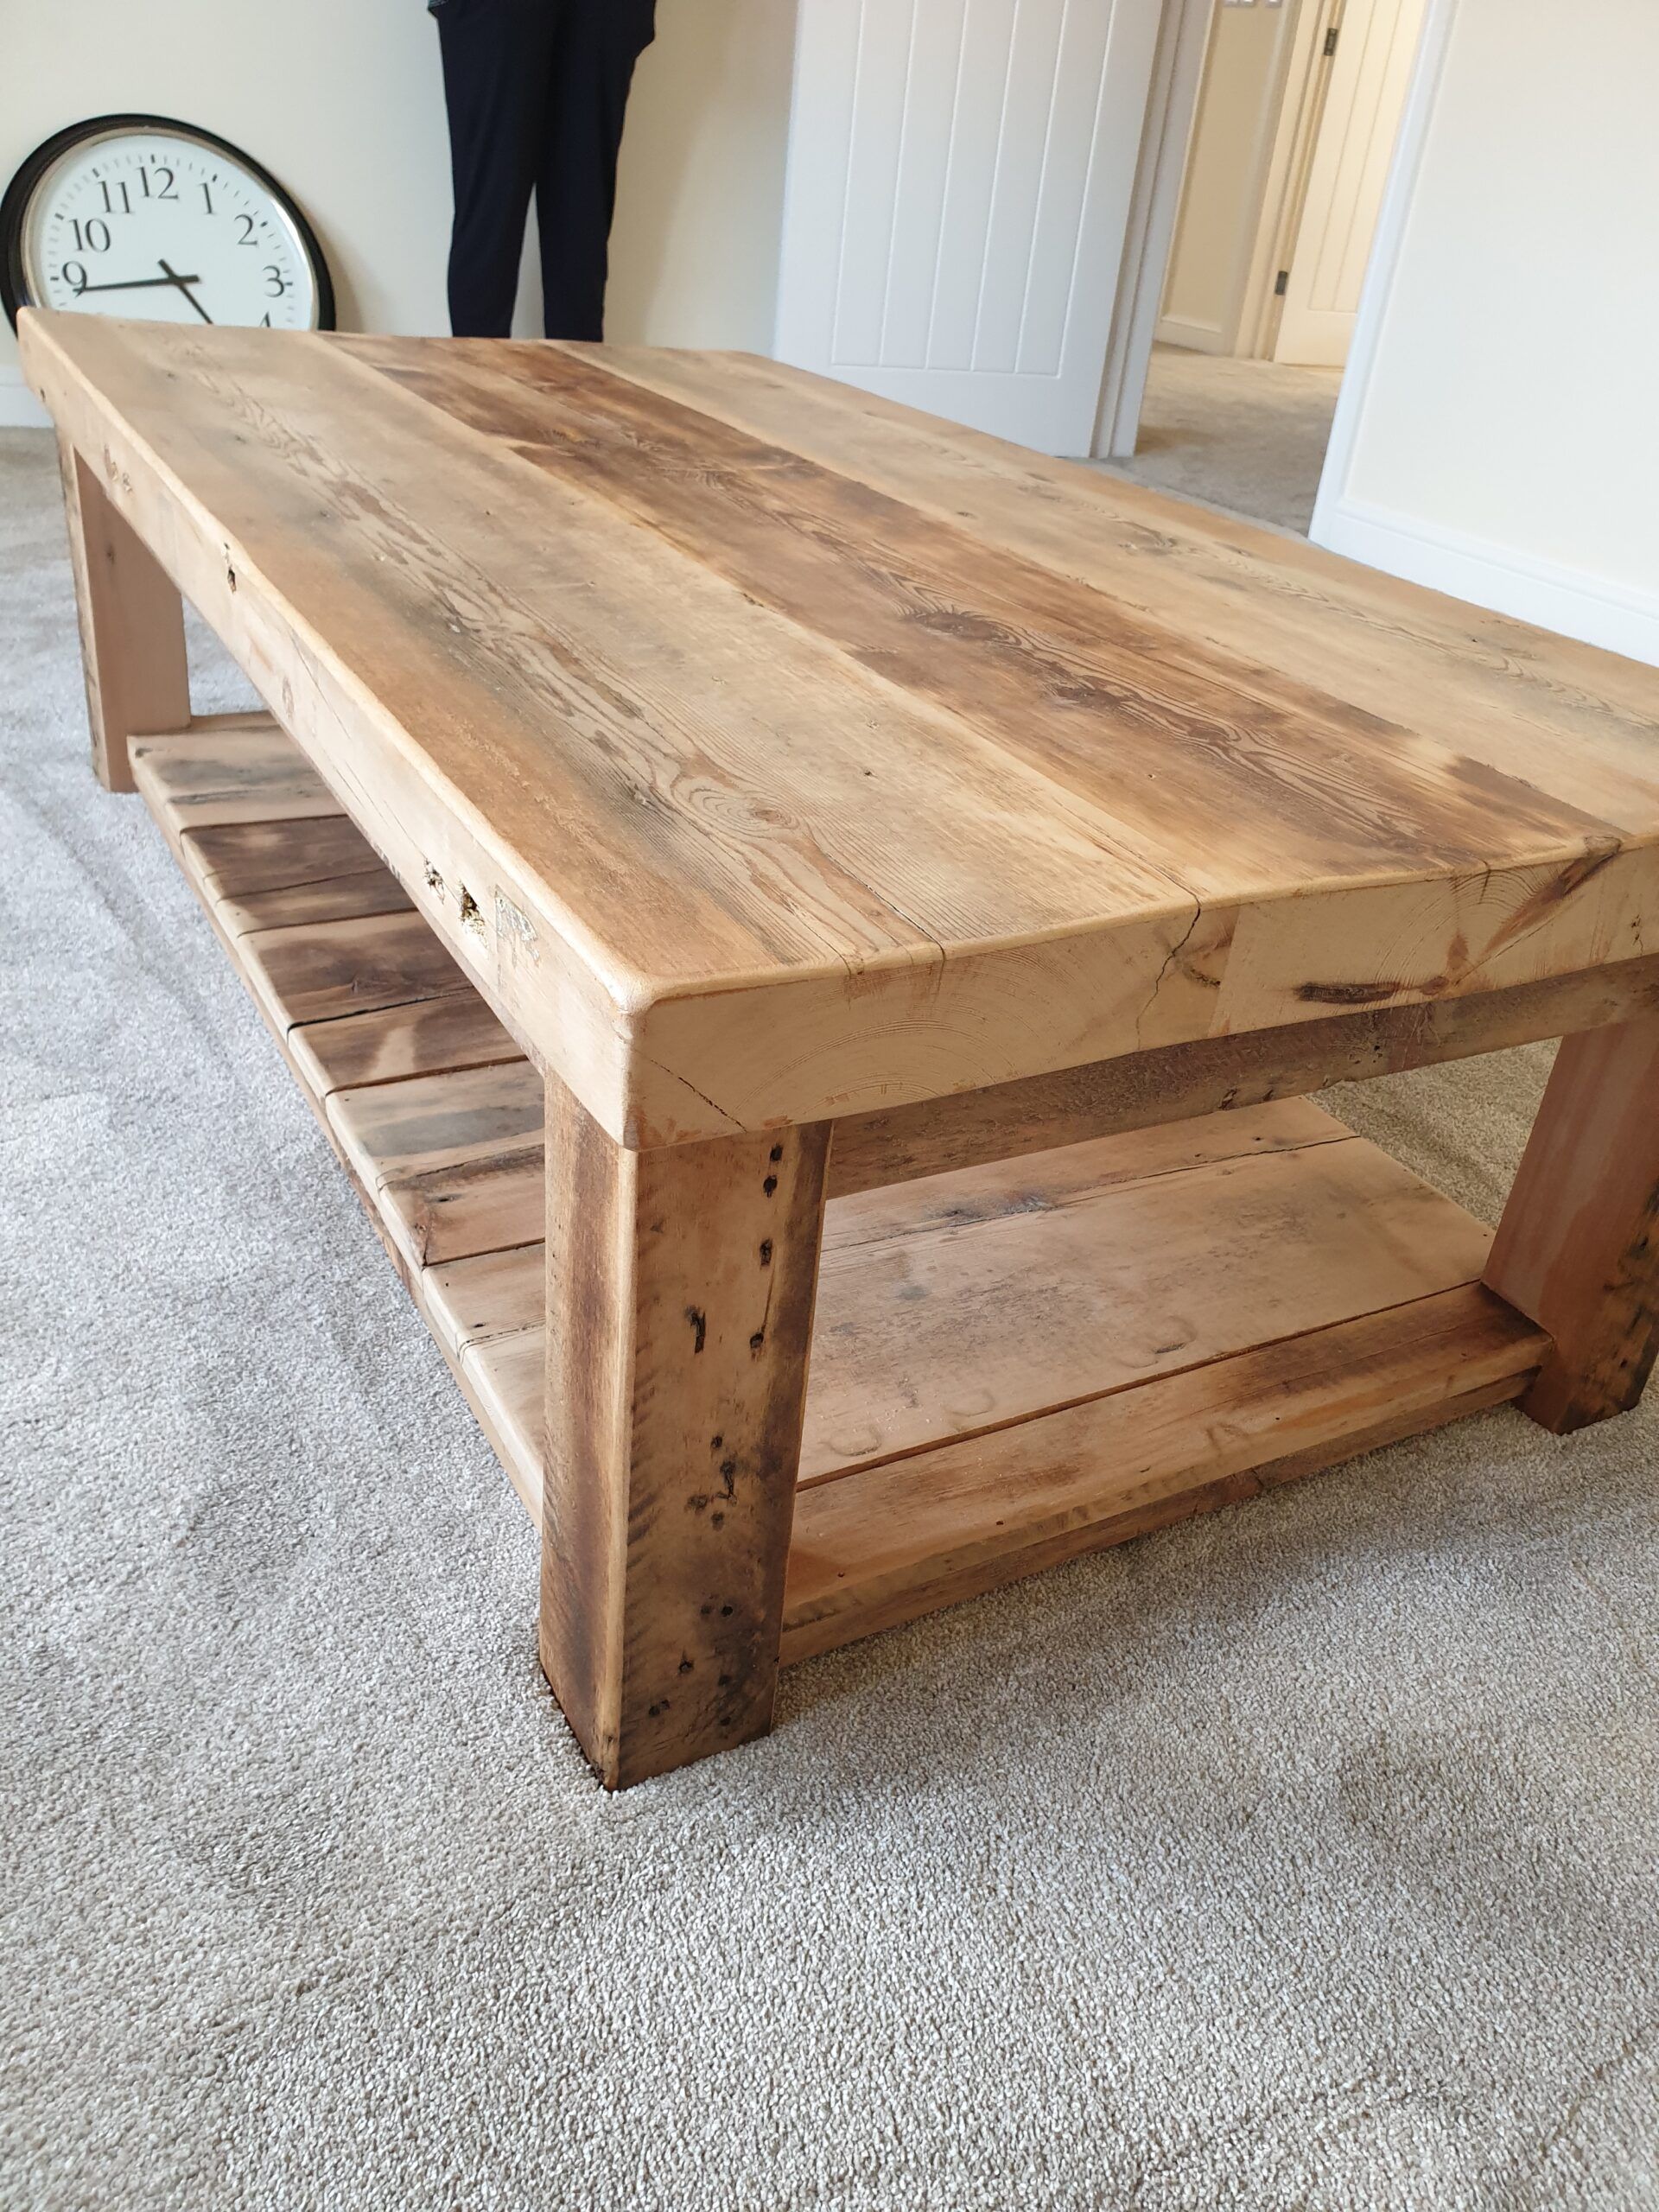 Buy Rustic Wood Coffee Table Made From Reclaimed Timber Throughout Rustic Coffee Tables (View 7 of 20)